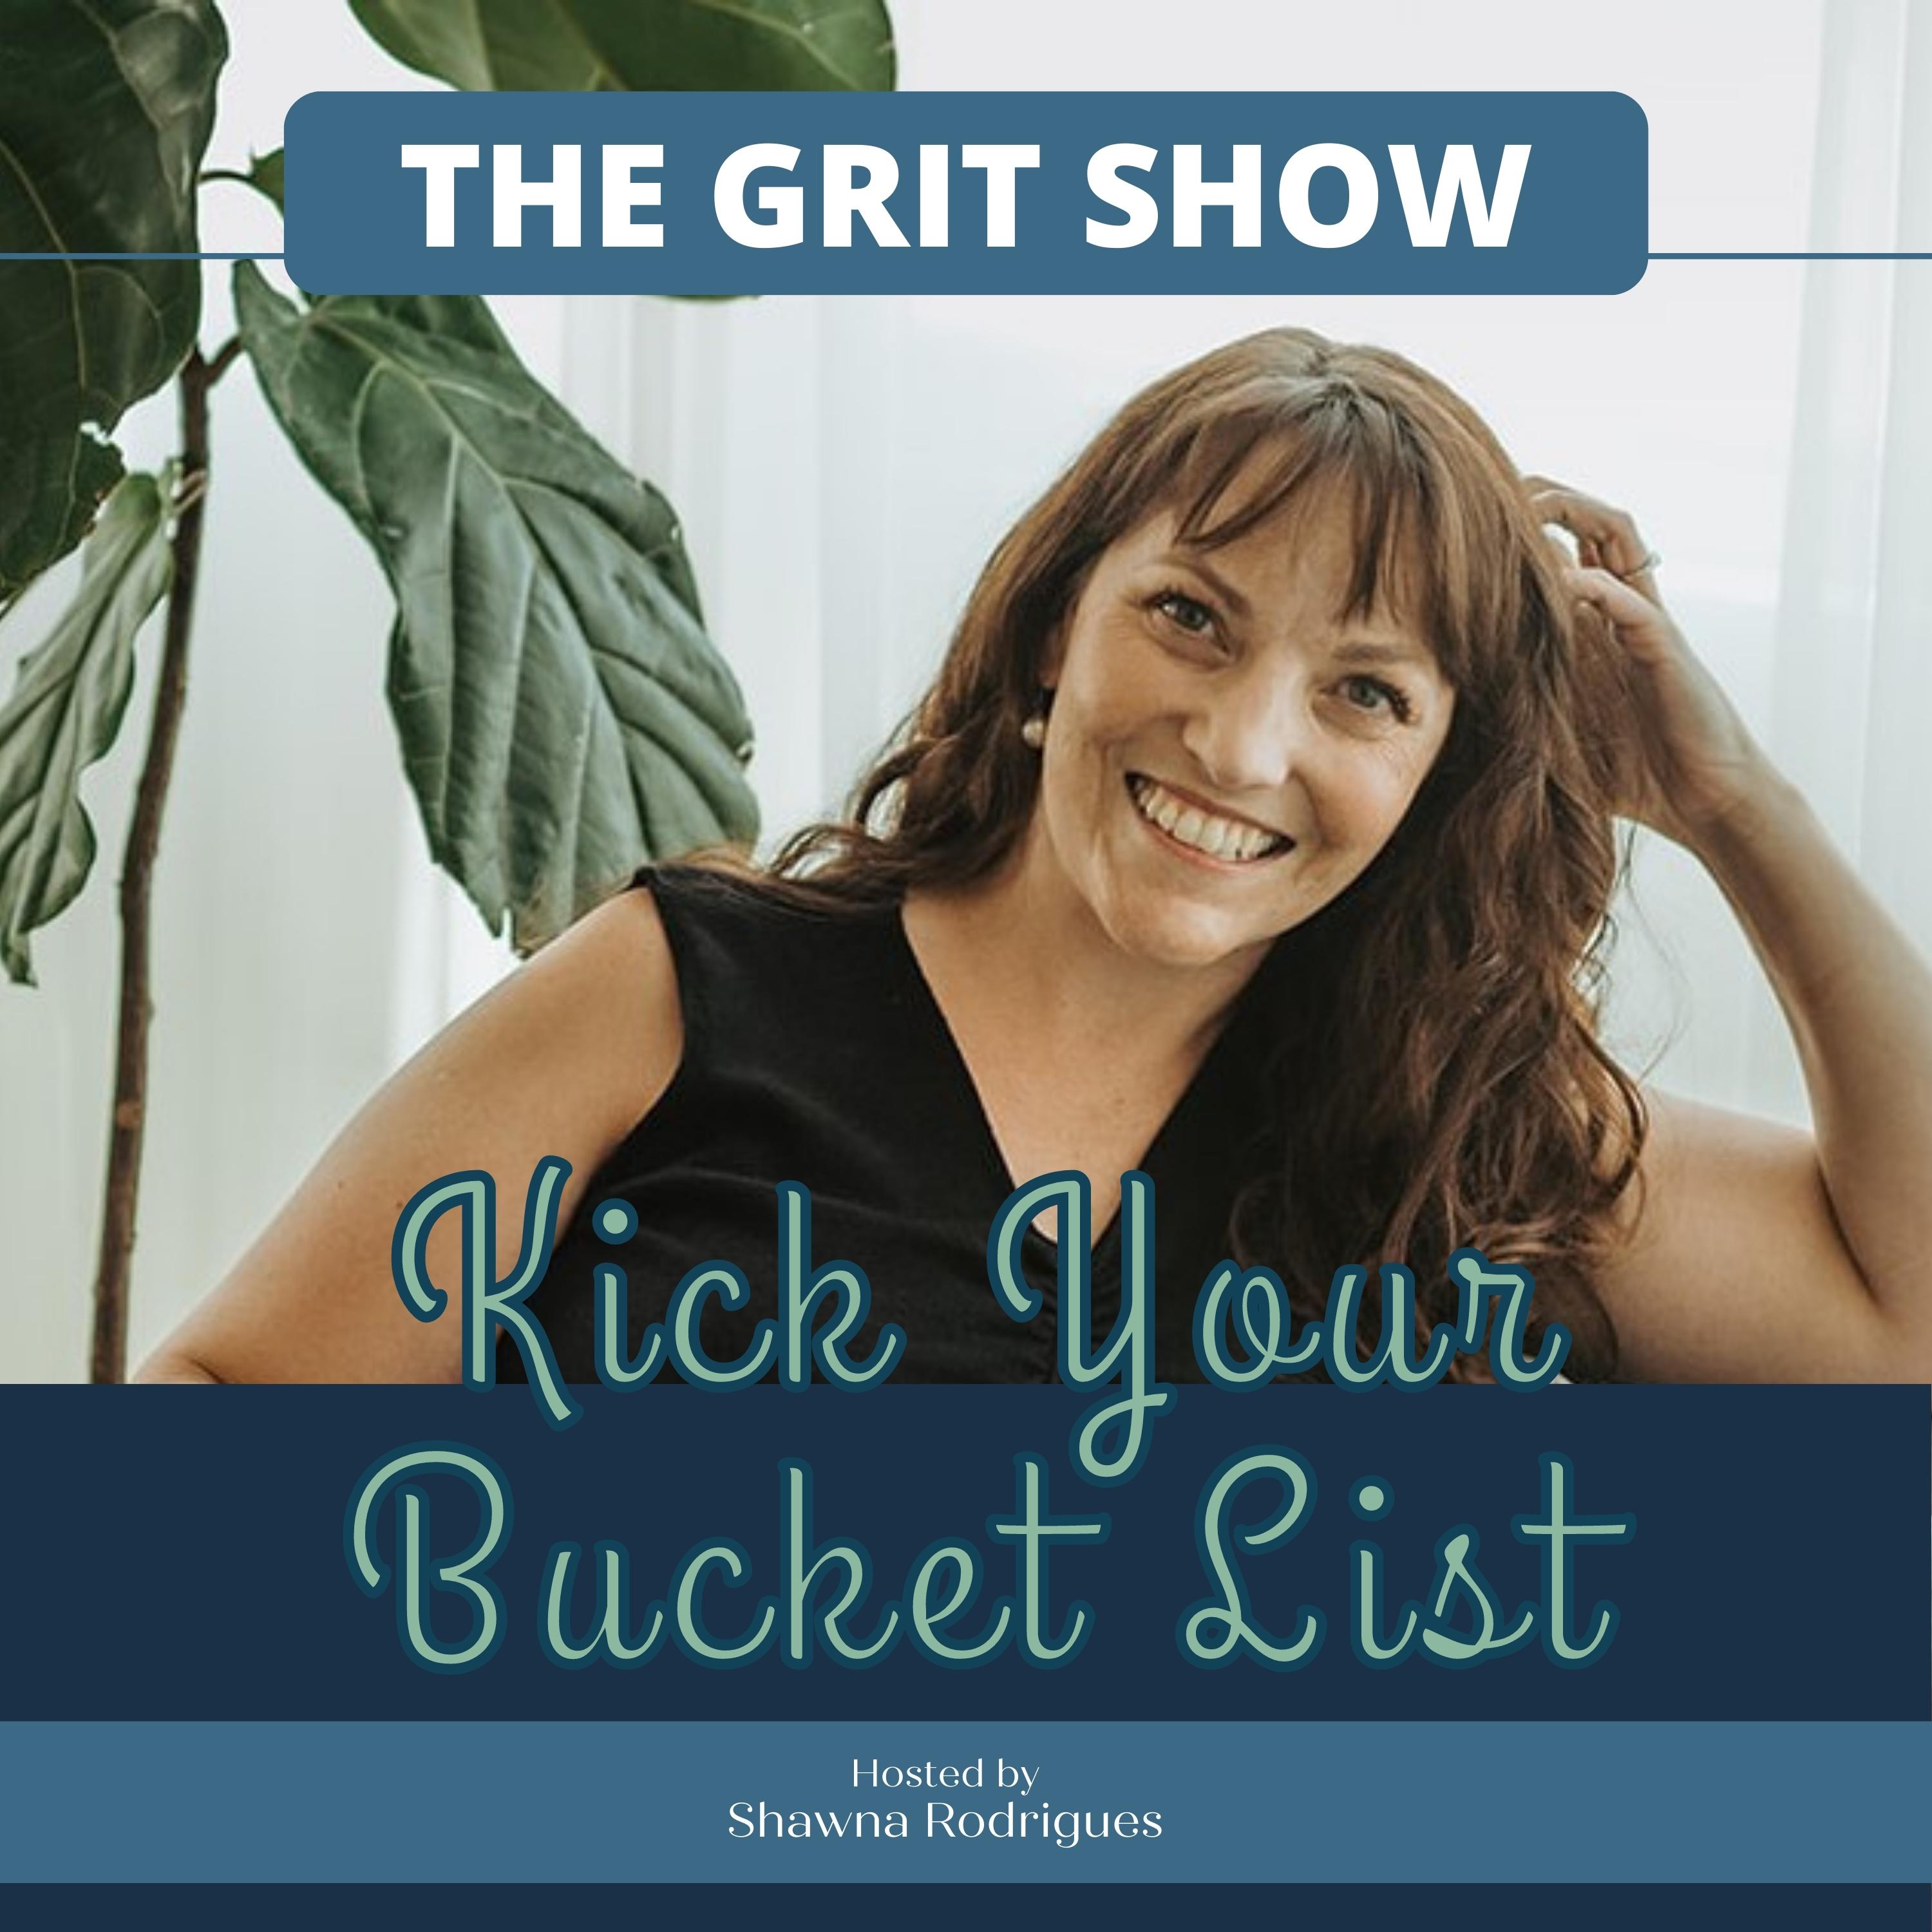 Artwork for podcast THE GRIT SHOW